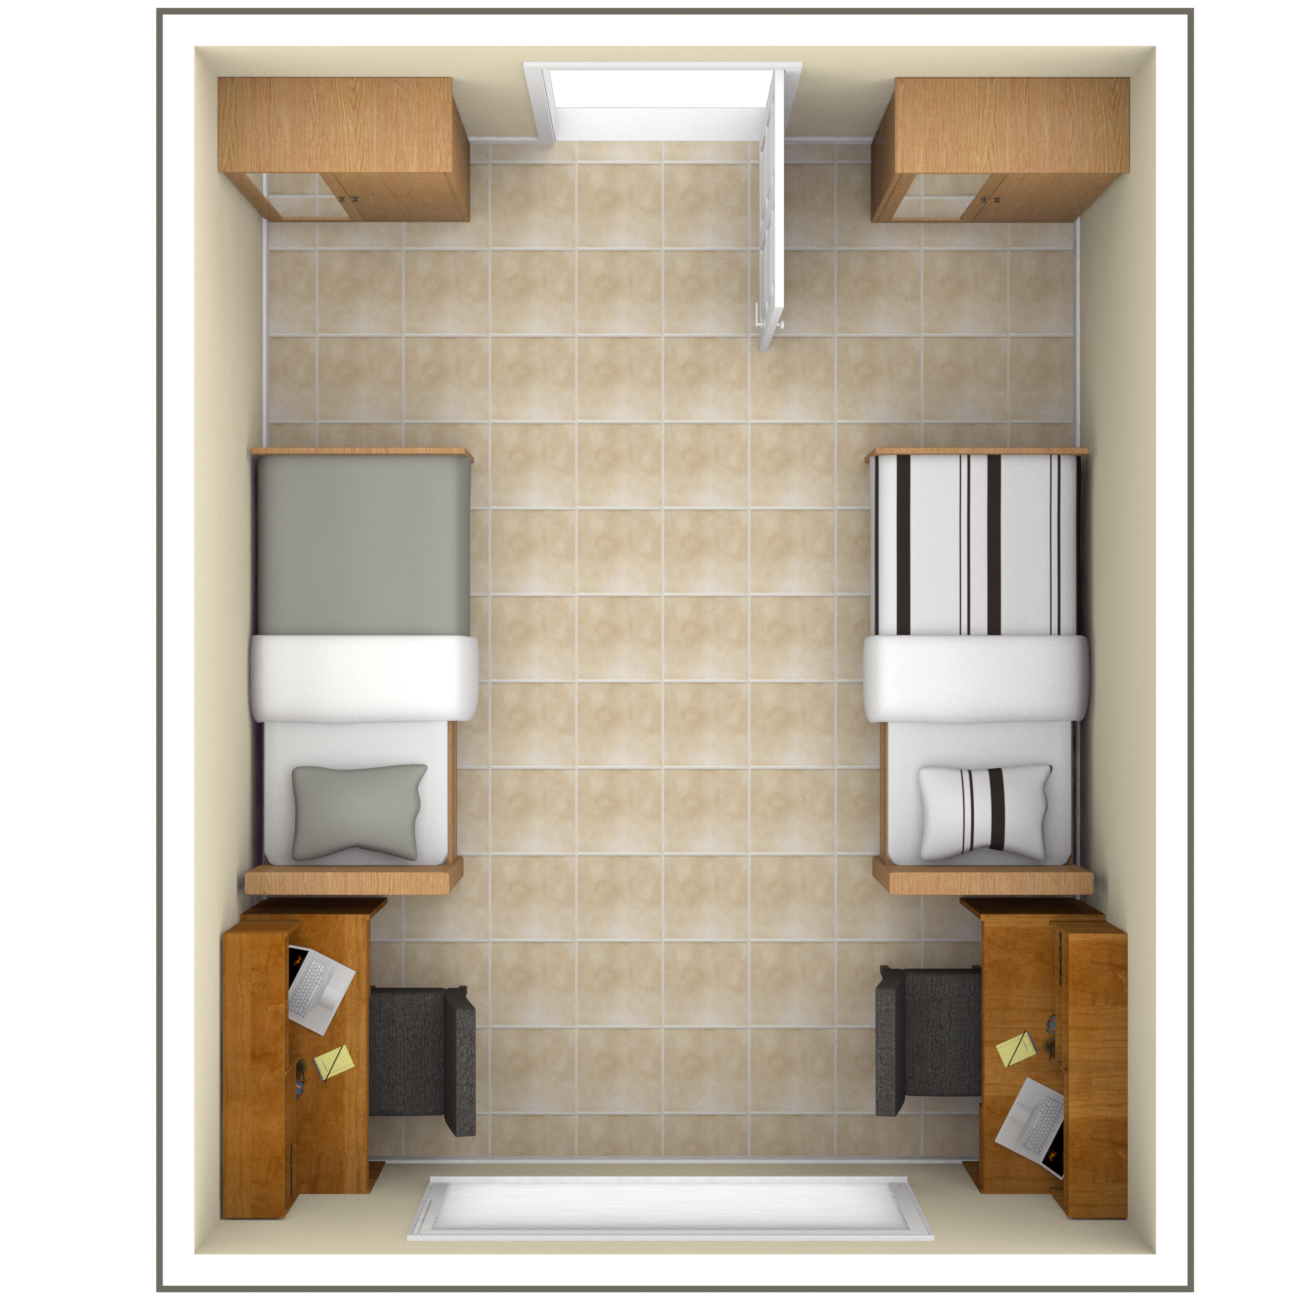 Miller Hall Room Layout — University Housing and the Resident Experience